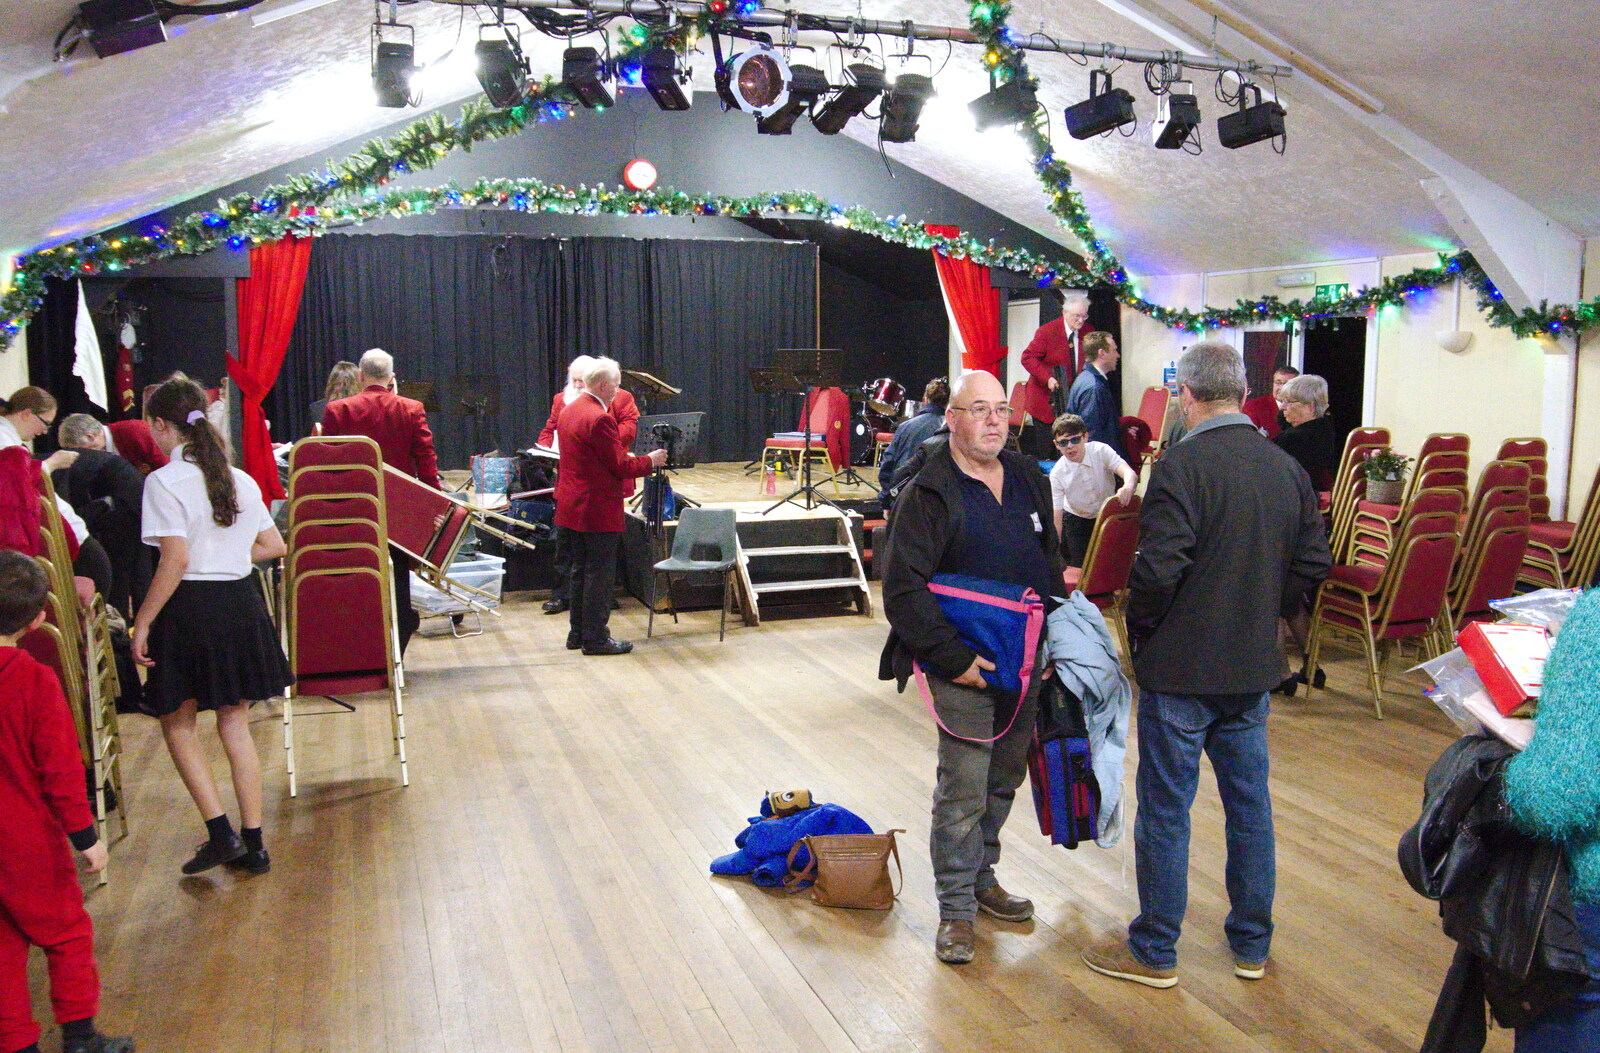 In Gislingham village hall  from GSB Concerts and the BSCC Christmas Dinner, Suffolk - 13th December 2019